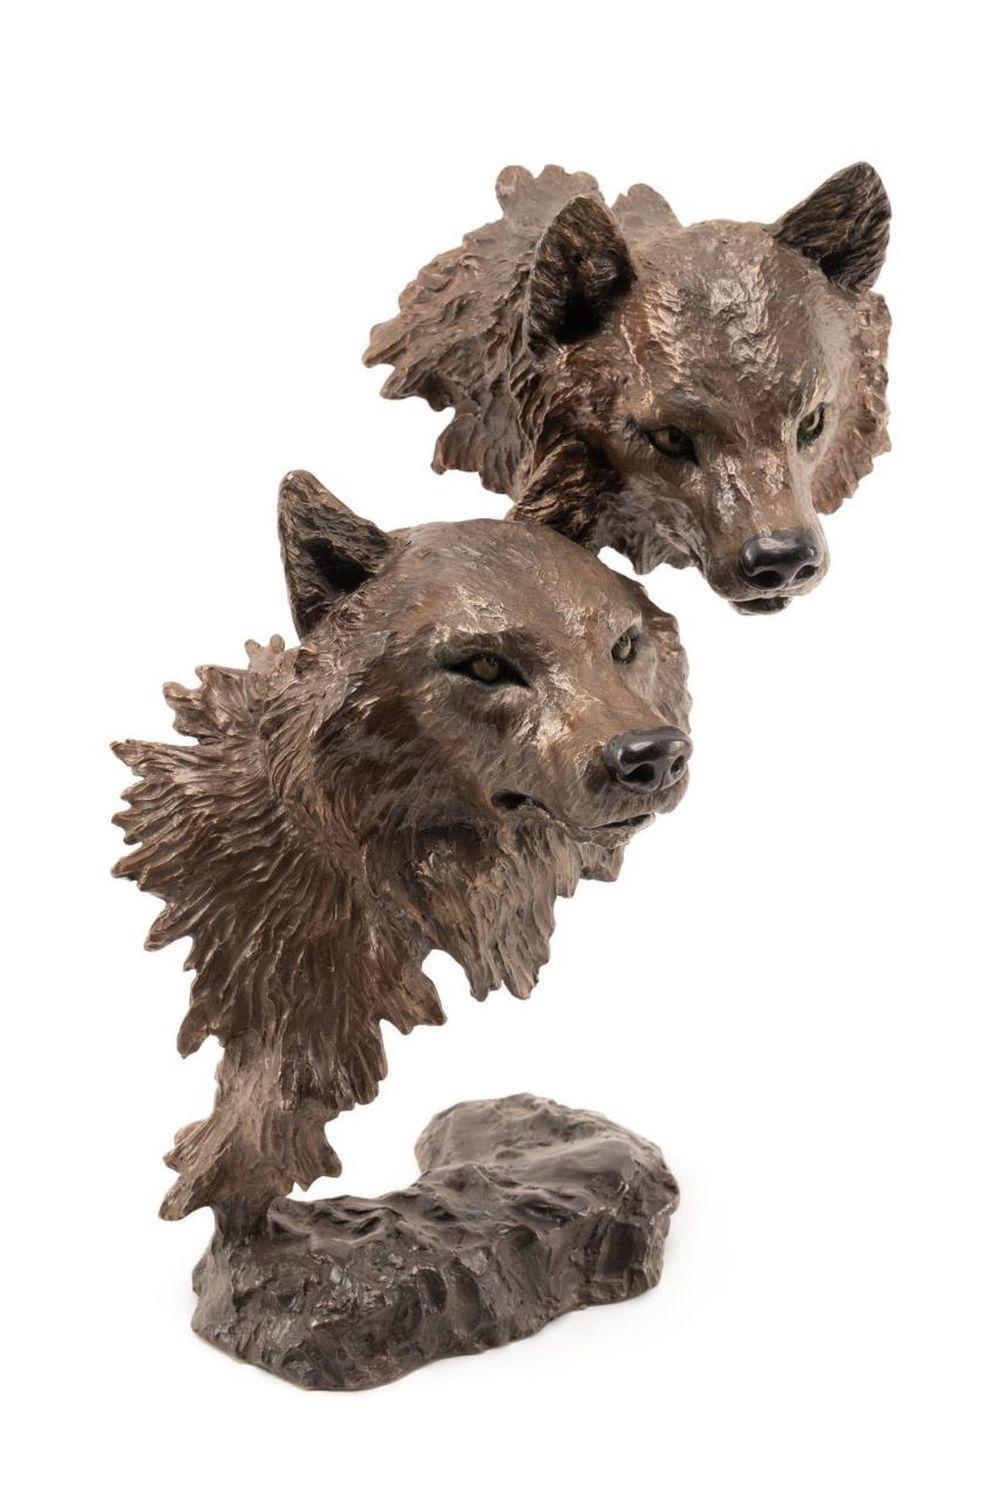 Presented is an original bronze Western wildlife sculpture by American artist Mark Hopkins. The bronze is titled “Instinct” and depicts two expertly sculpted wolf heads. Using the involved and lengthy method of lost-wax casting, “Instinct” captures